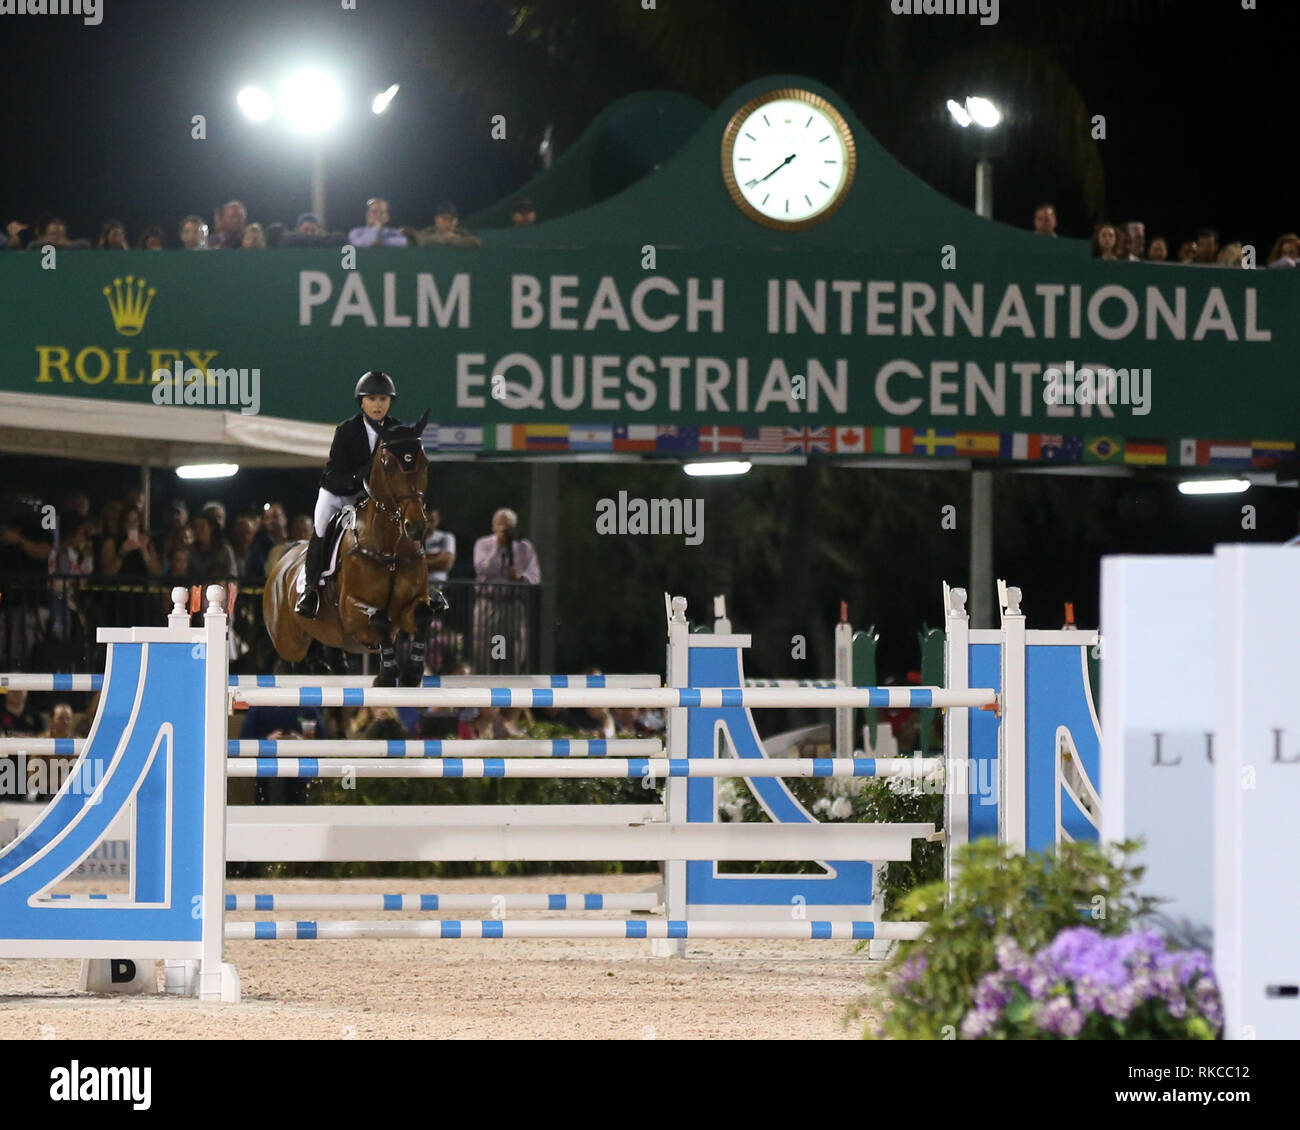 WELLINGTION, FL - FEBRUARY 09: SATURDAY NIGHT LIGHTS: Georgina Bloomberg participates in Class 101 - FEI CSI5* $391,000 Fidelity Investments Grand Prix where the winner was Martin Fuchs (Swiss) second place was Kent Farrington (USA) and third was Conor Swail (IRE). The Winter Equestrian Festival (WEF) is the largest, longest running hunter/jumper equestrian event in the world held at the Palm Beach International Equestrian Center. Georgina Leigh Bloomberg is the owner of the equestrian team New York Empire; a professional equestrian; and a philanthropist. She is the daughter of Susan Brown an Stock Photo